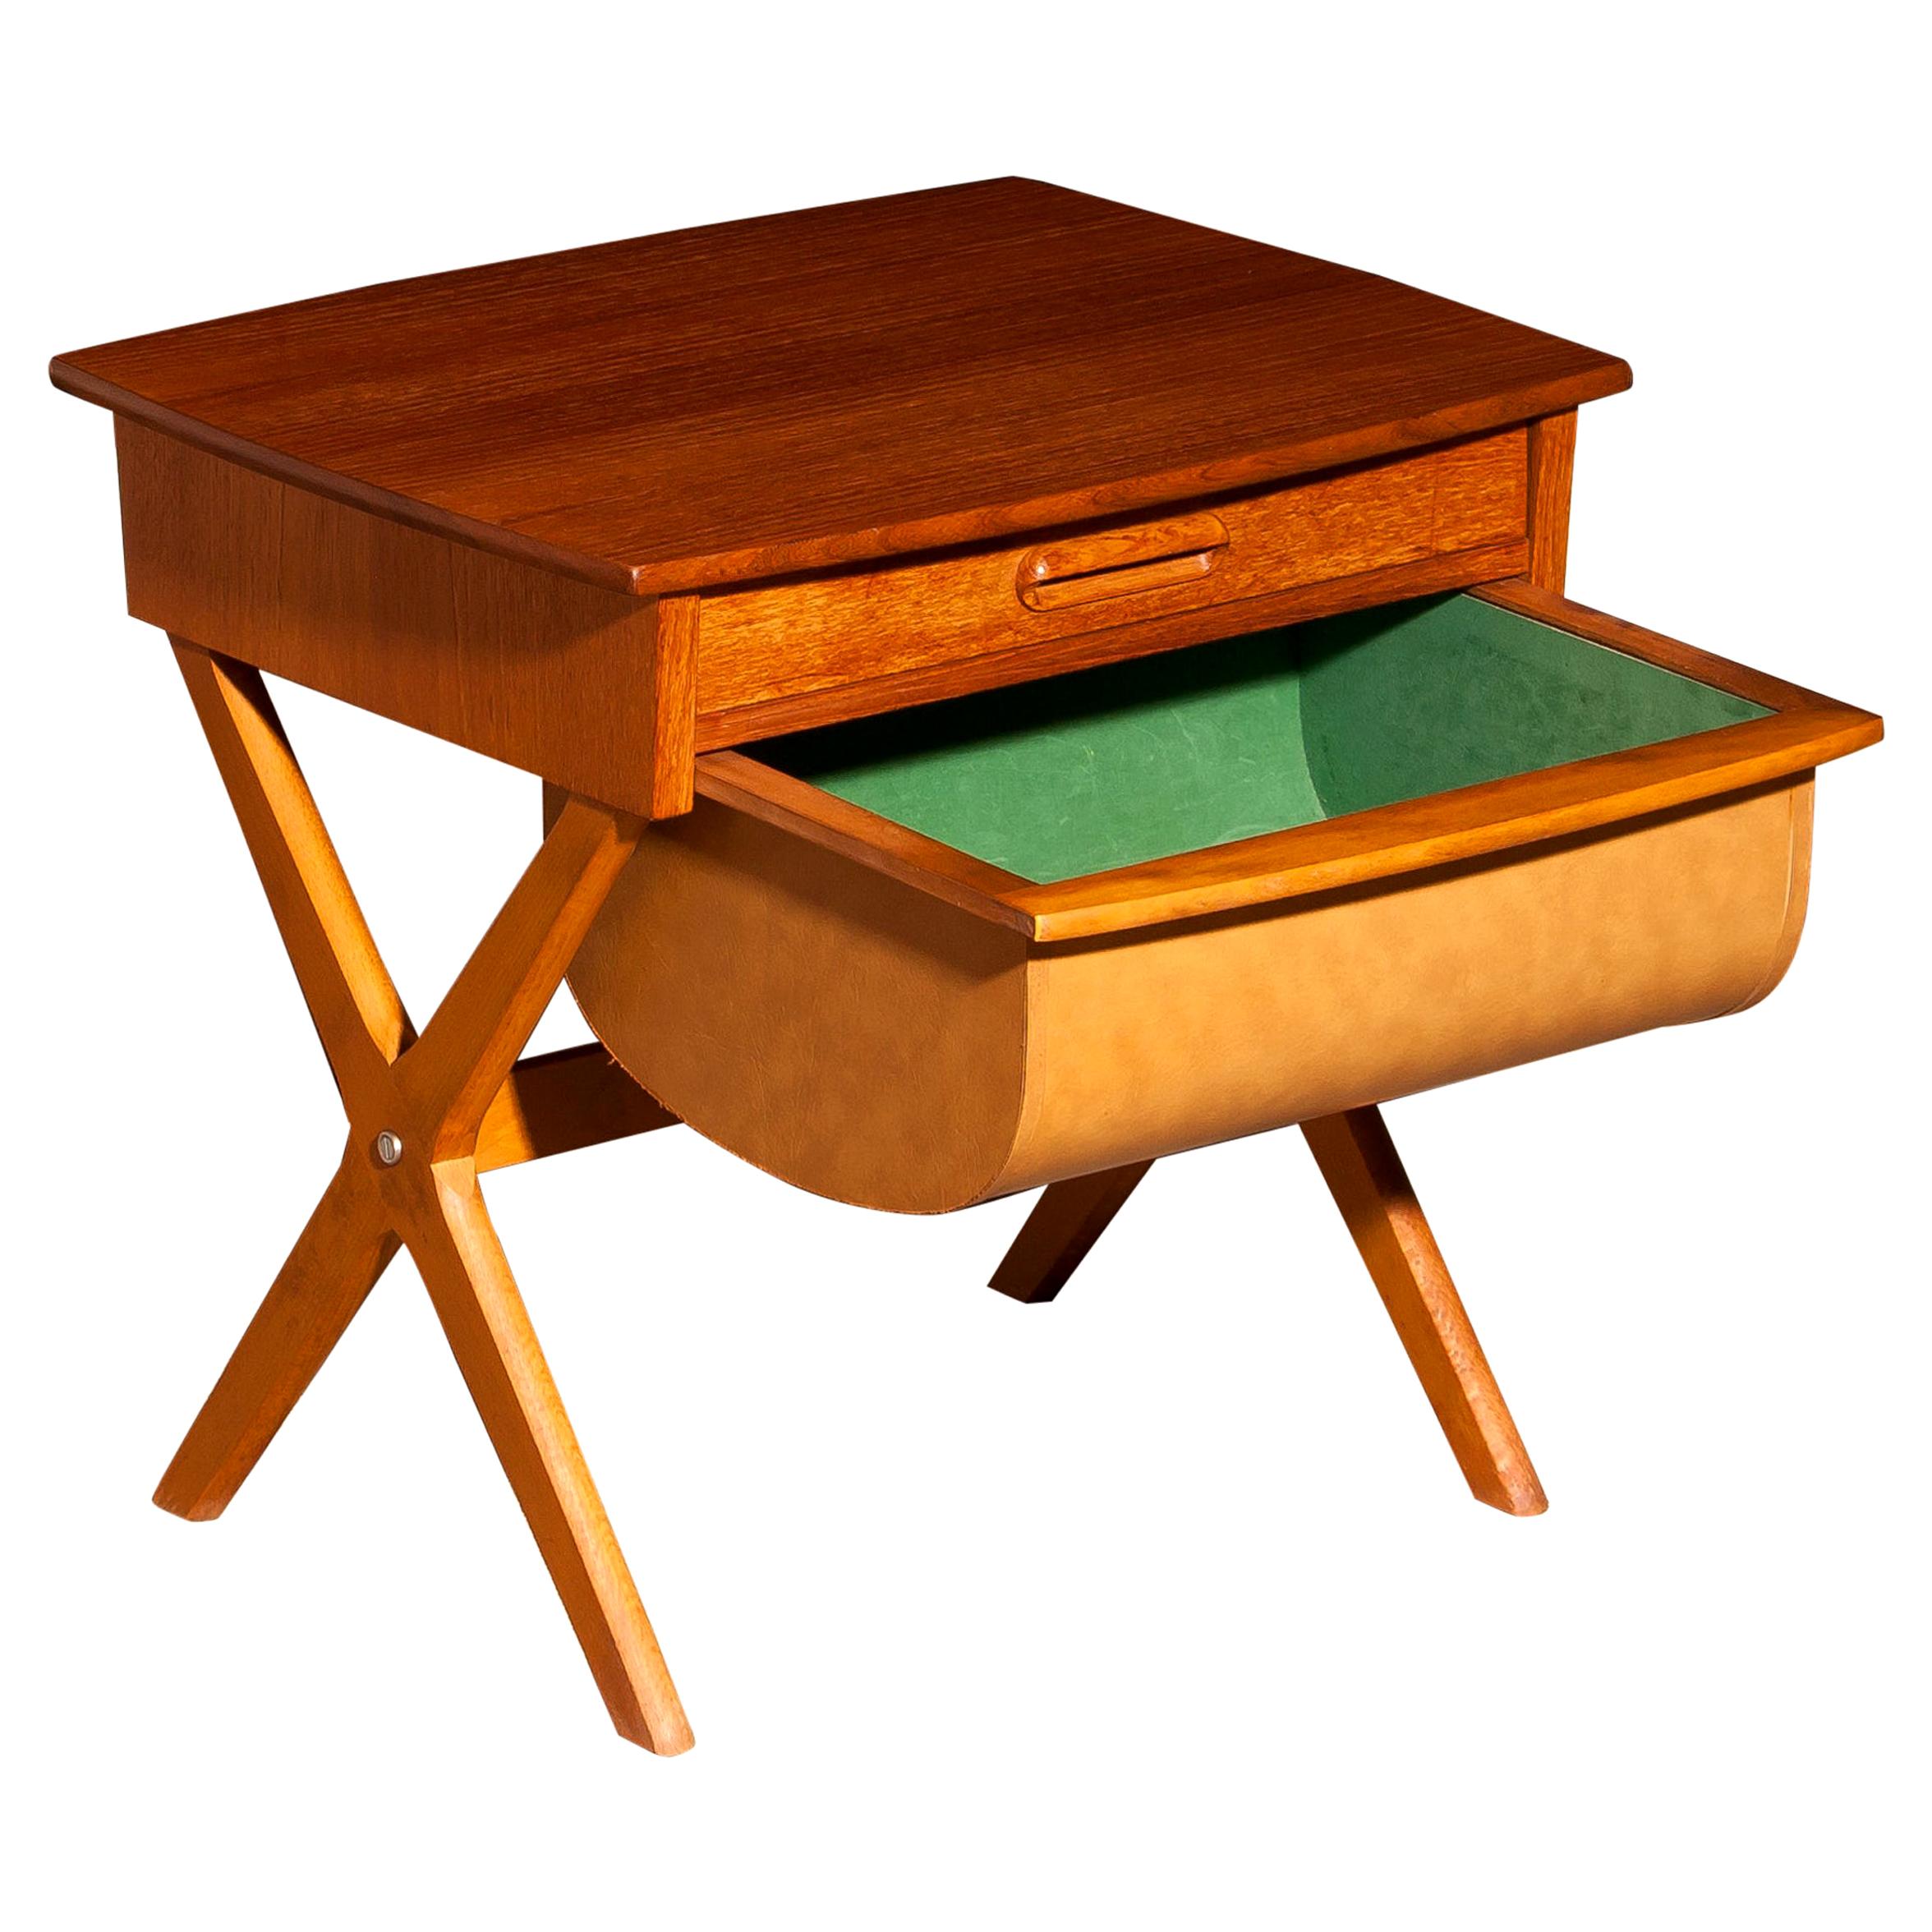 Very nice sewing table made in Sweden.
This table is made of teak and has one normal drawer and one deep drawer.
It is in a beautiful condition.
Period: 1960s.
Dimensions: H 52 cm x W 52 cm x D 45 cm.